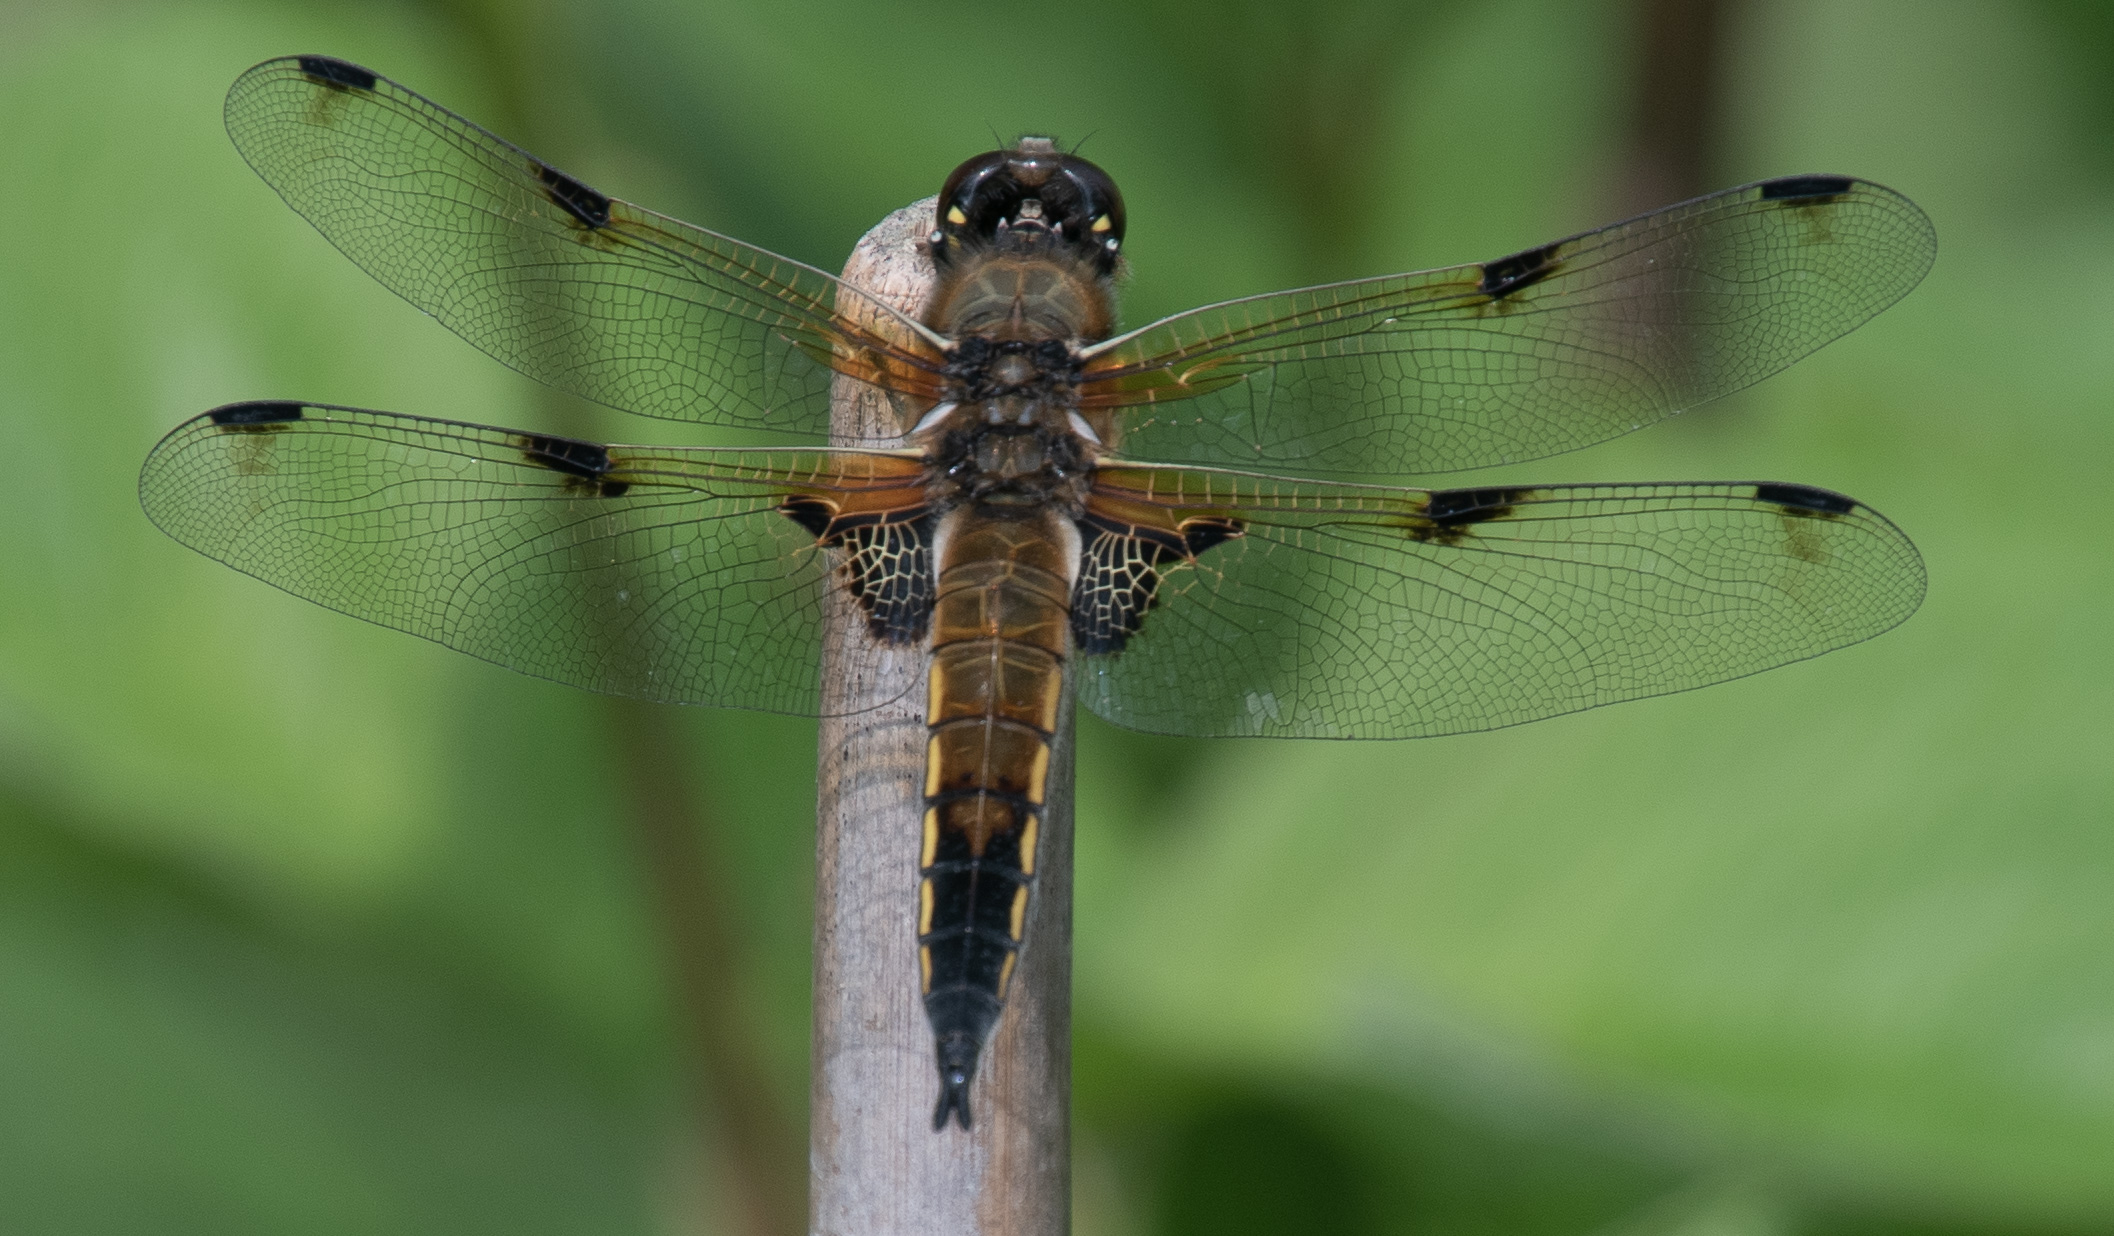 July: Four-spotted Chaser, Hopbines Garden